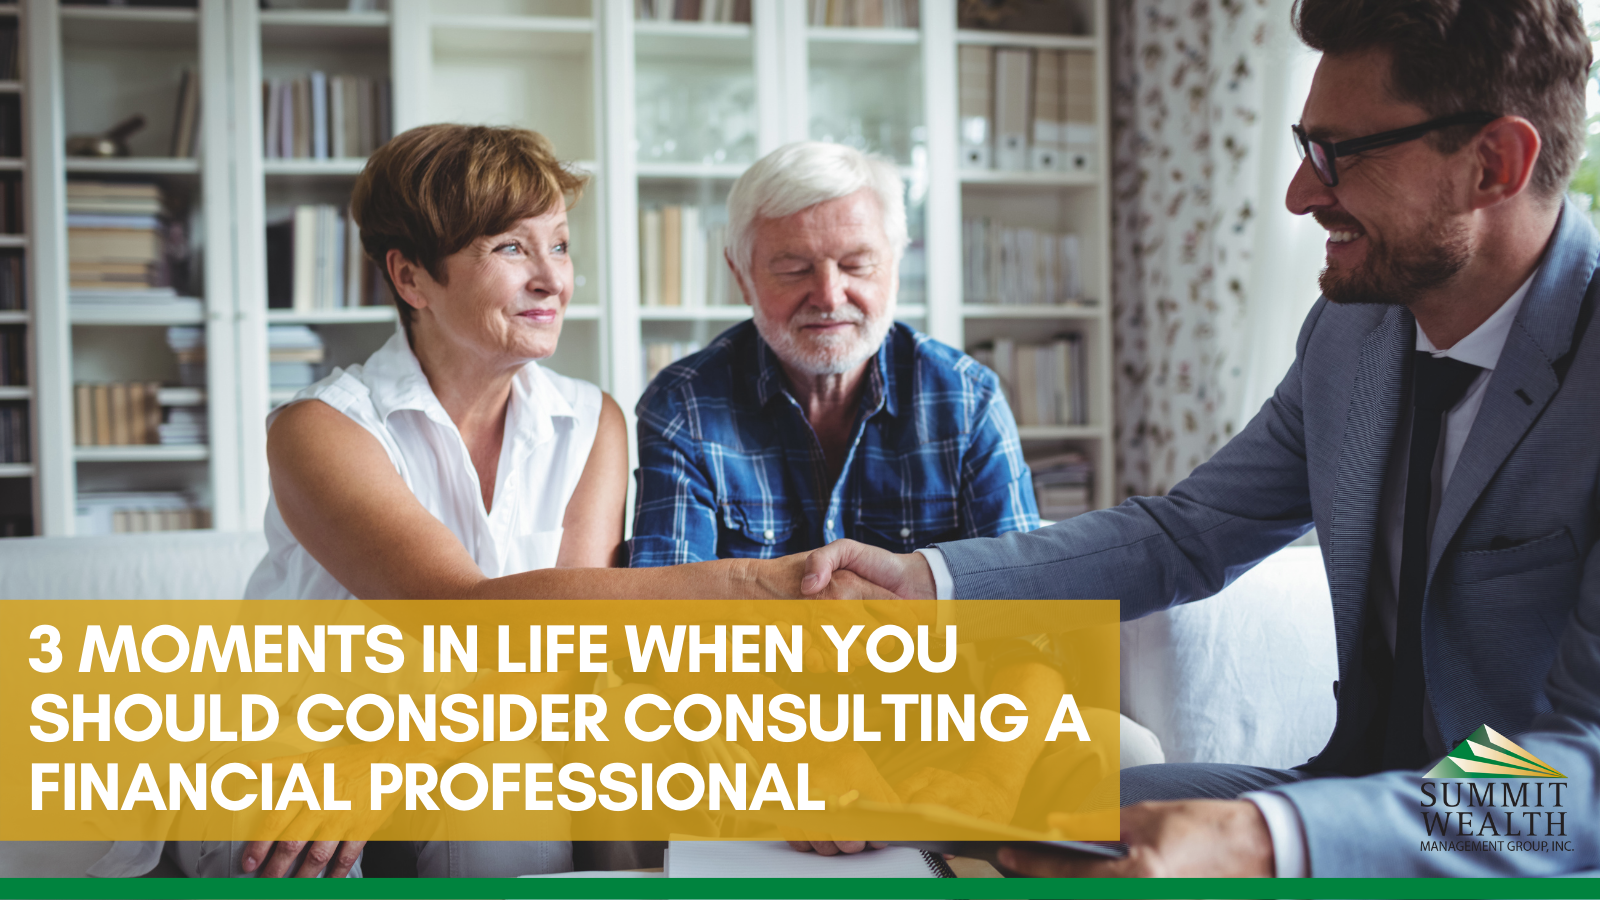 3 Moments in Life Where You Should Consider Consulting a Financial Professional